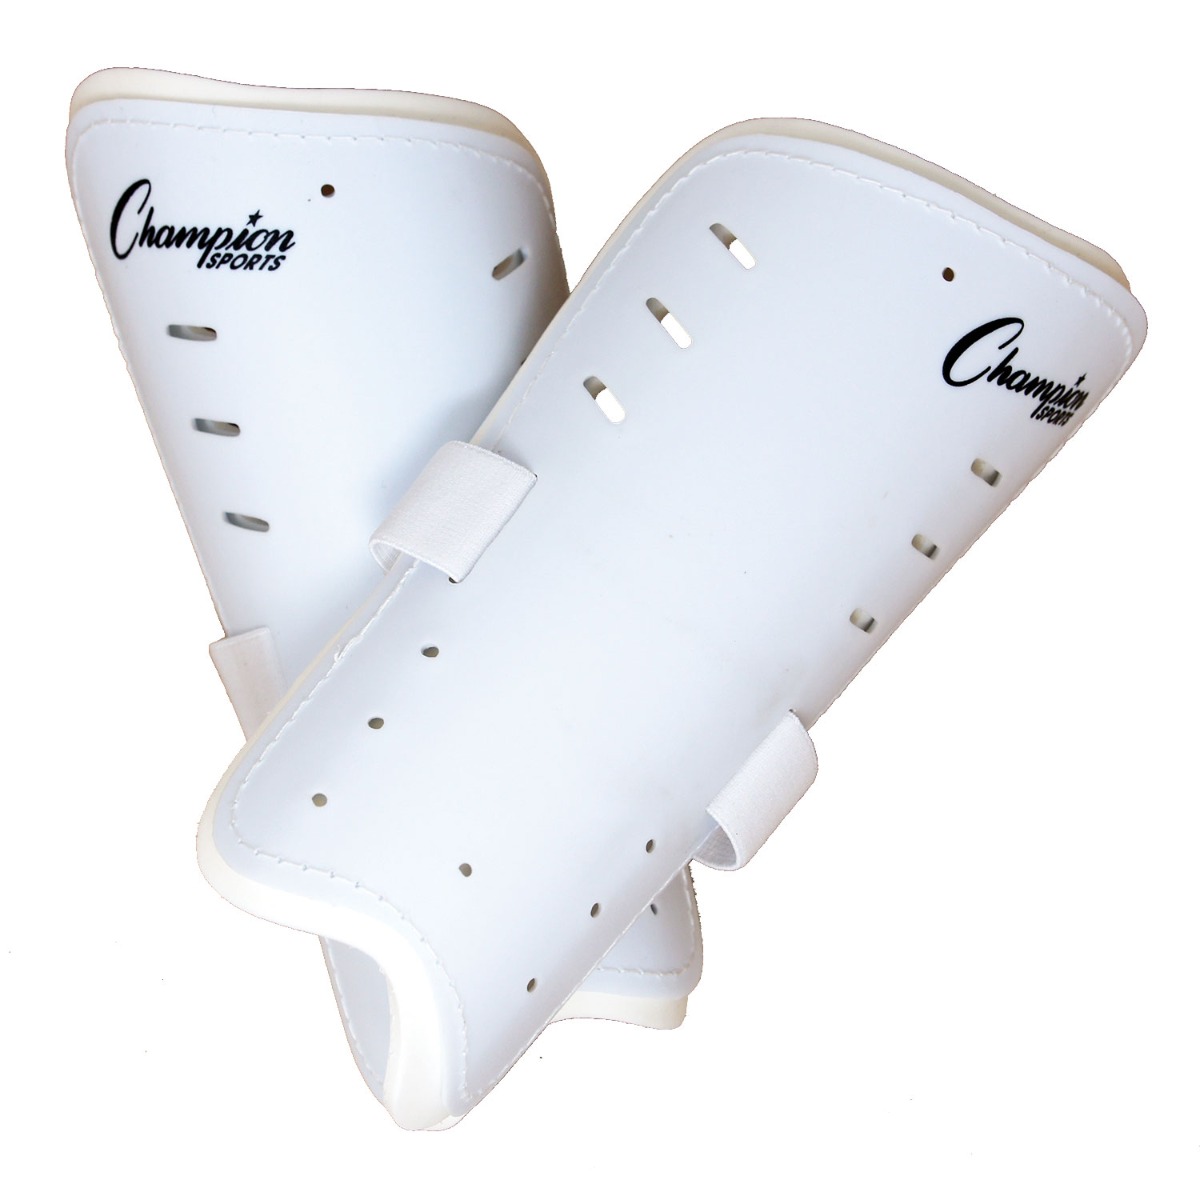 8" Deluxe Shin Guards (Pair)